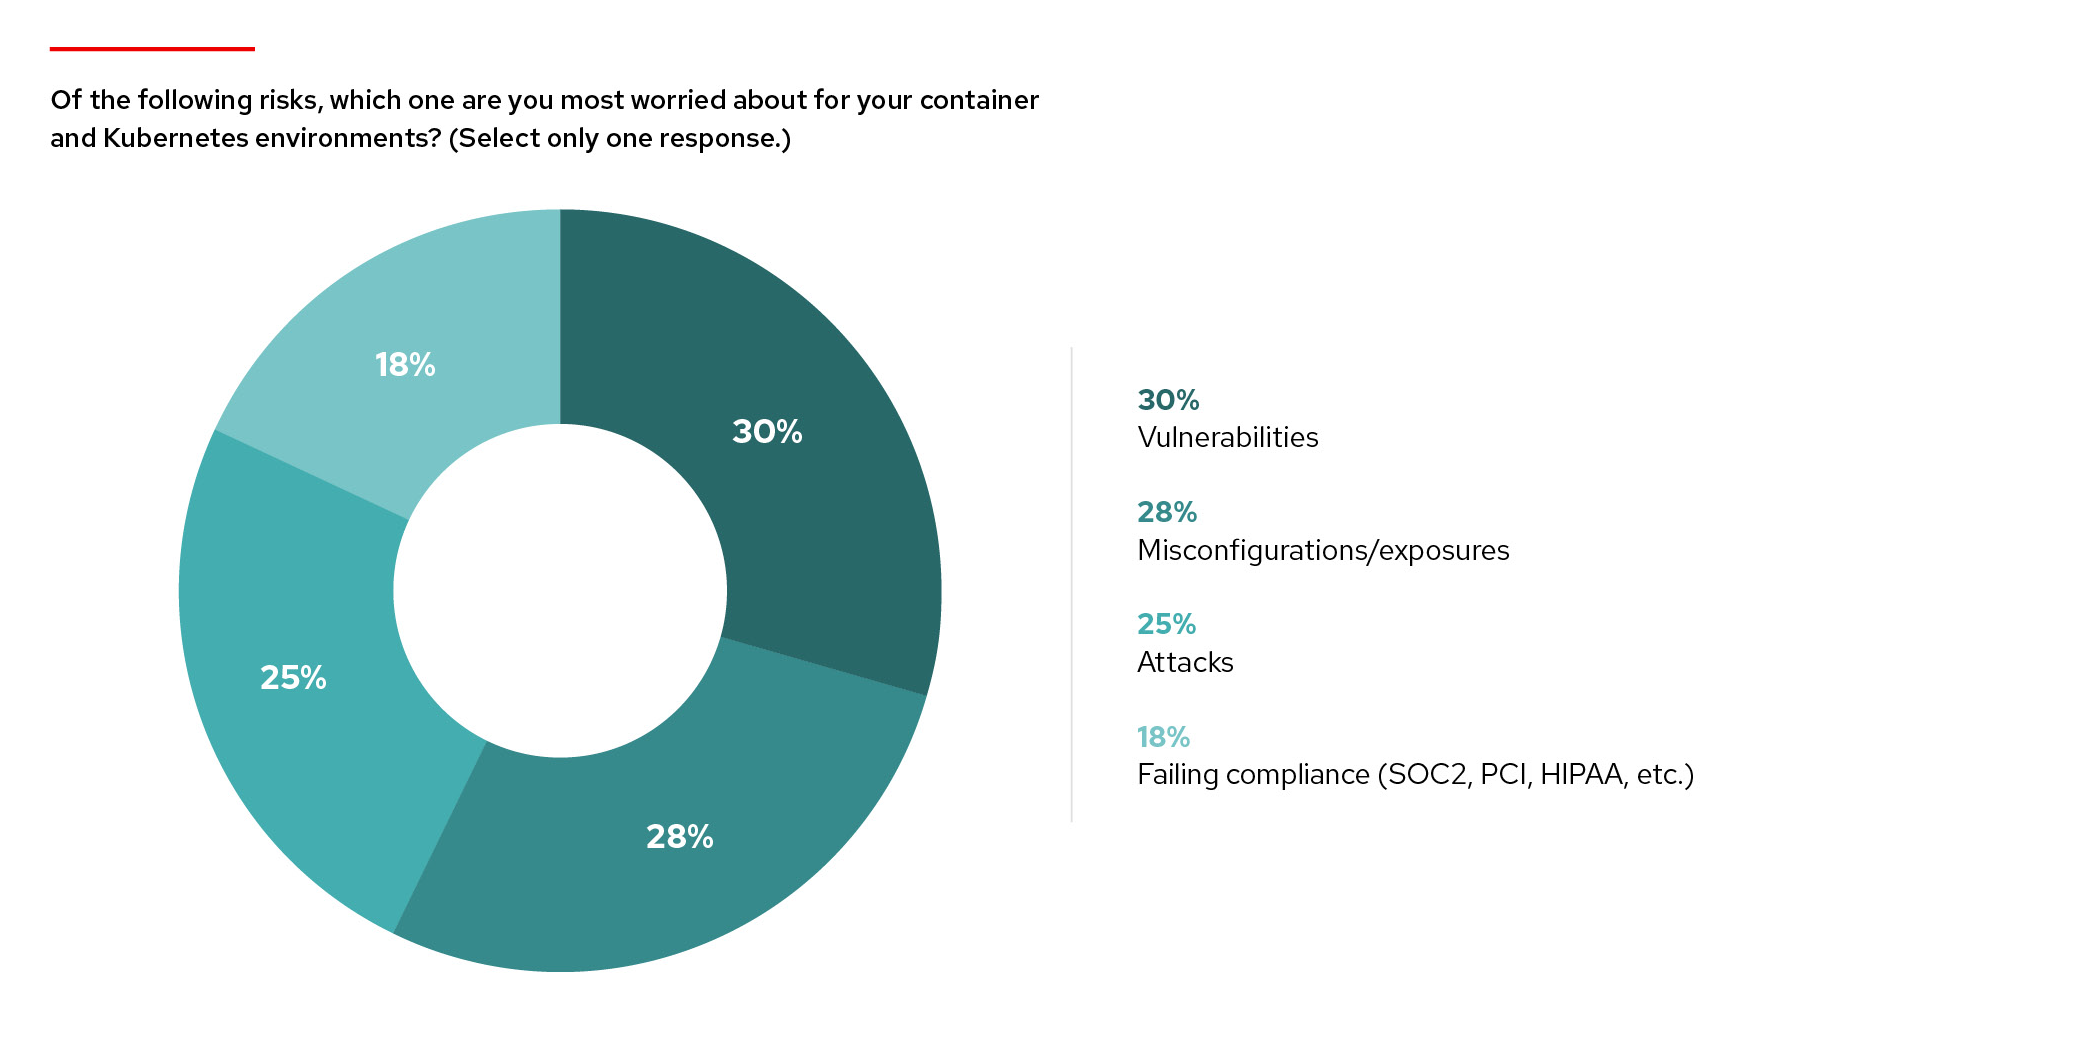 Chart: Of the following risks, which one are you most worried about for your container and Kubernetes environments? Select only one response. Top answers are Vulnerabilities at 30%, Misconfigurations/exposures at 28%, Attacks at 25%, and Failing compliance (such as SOC2, PCI, and HIPPA) at 18%.